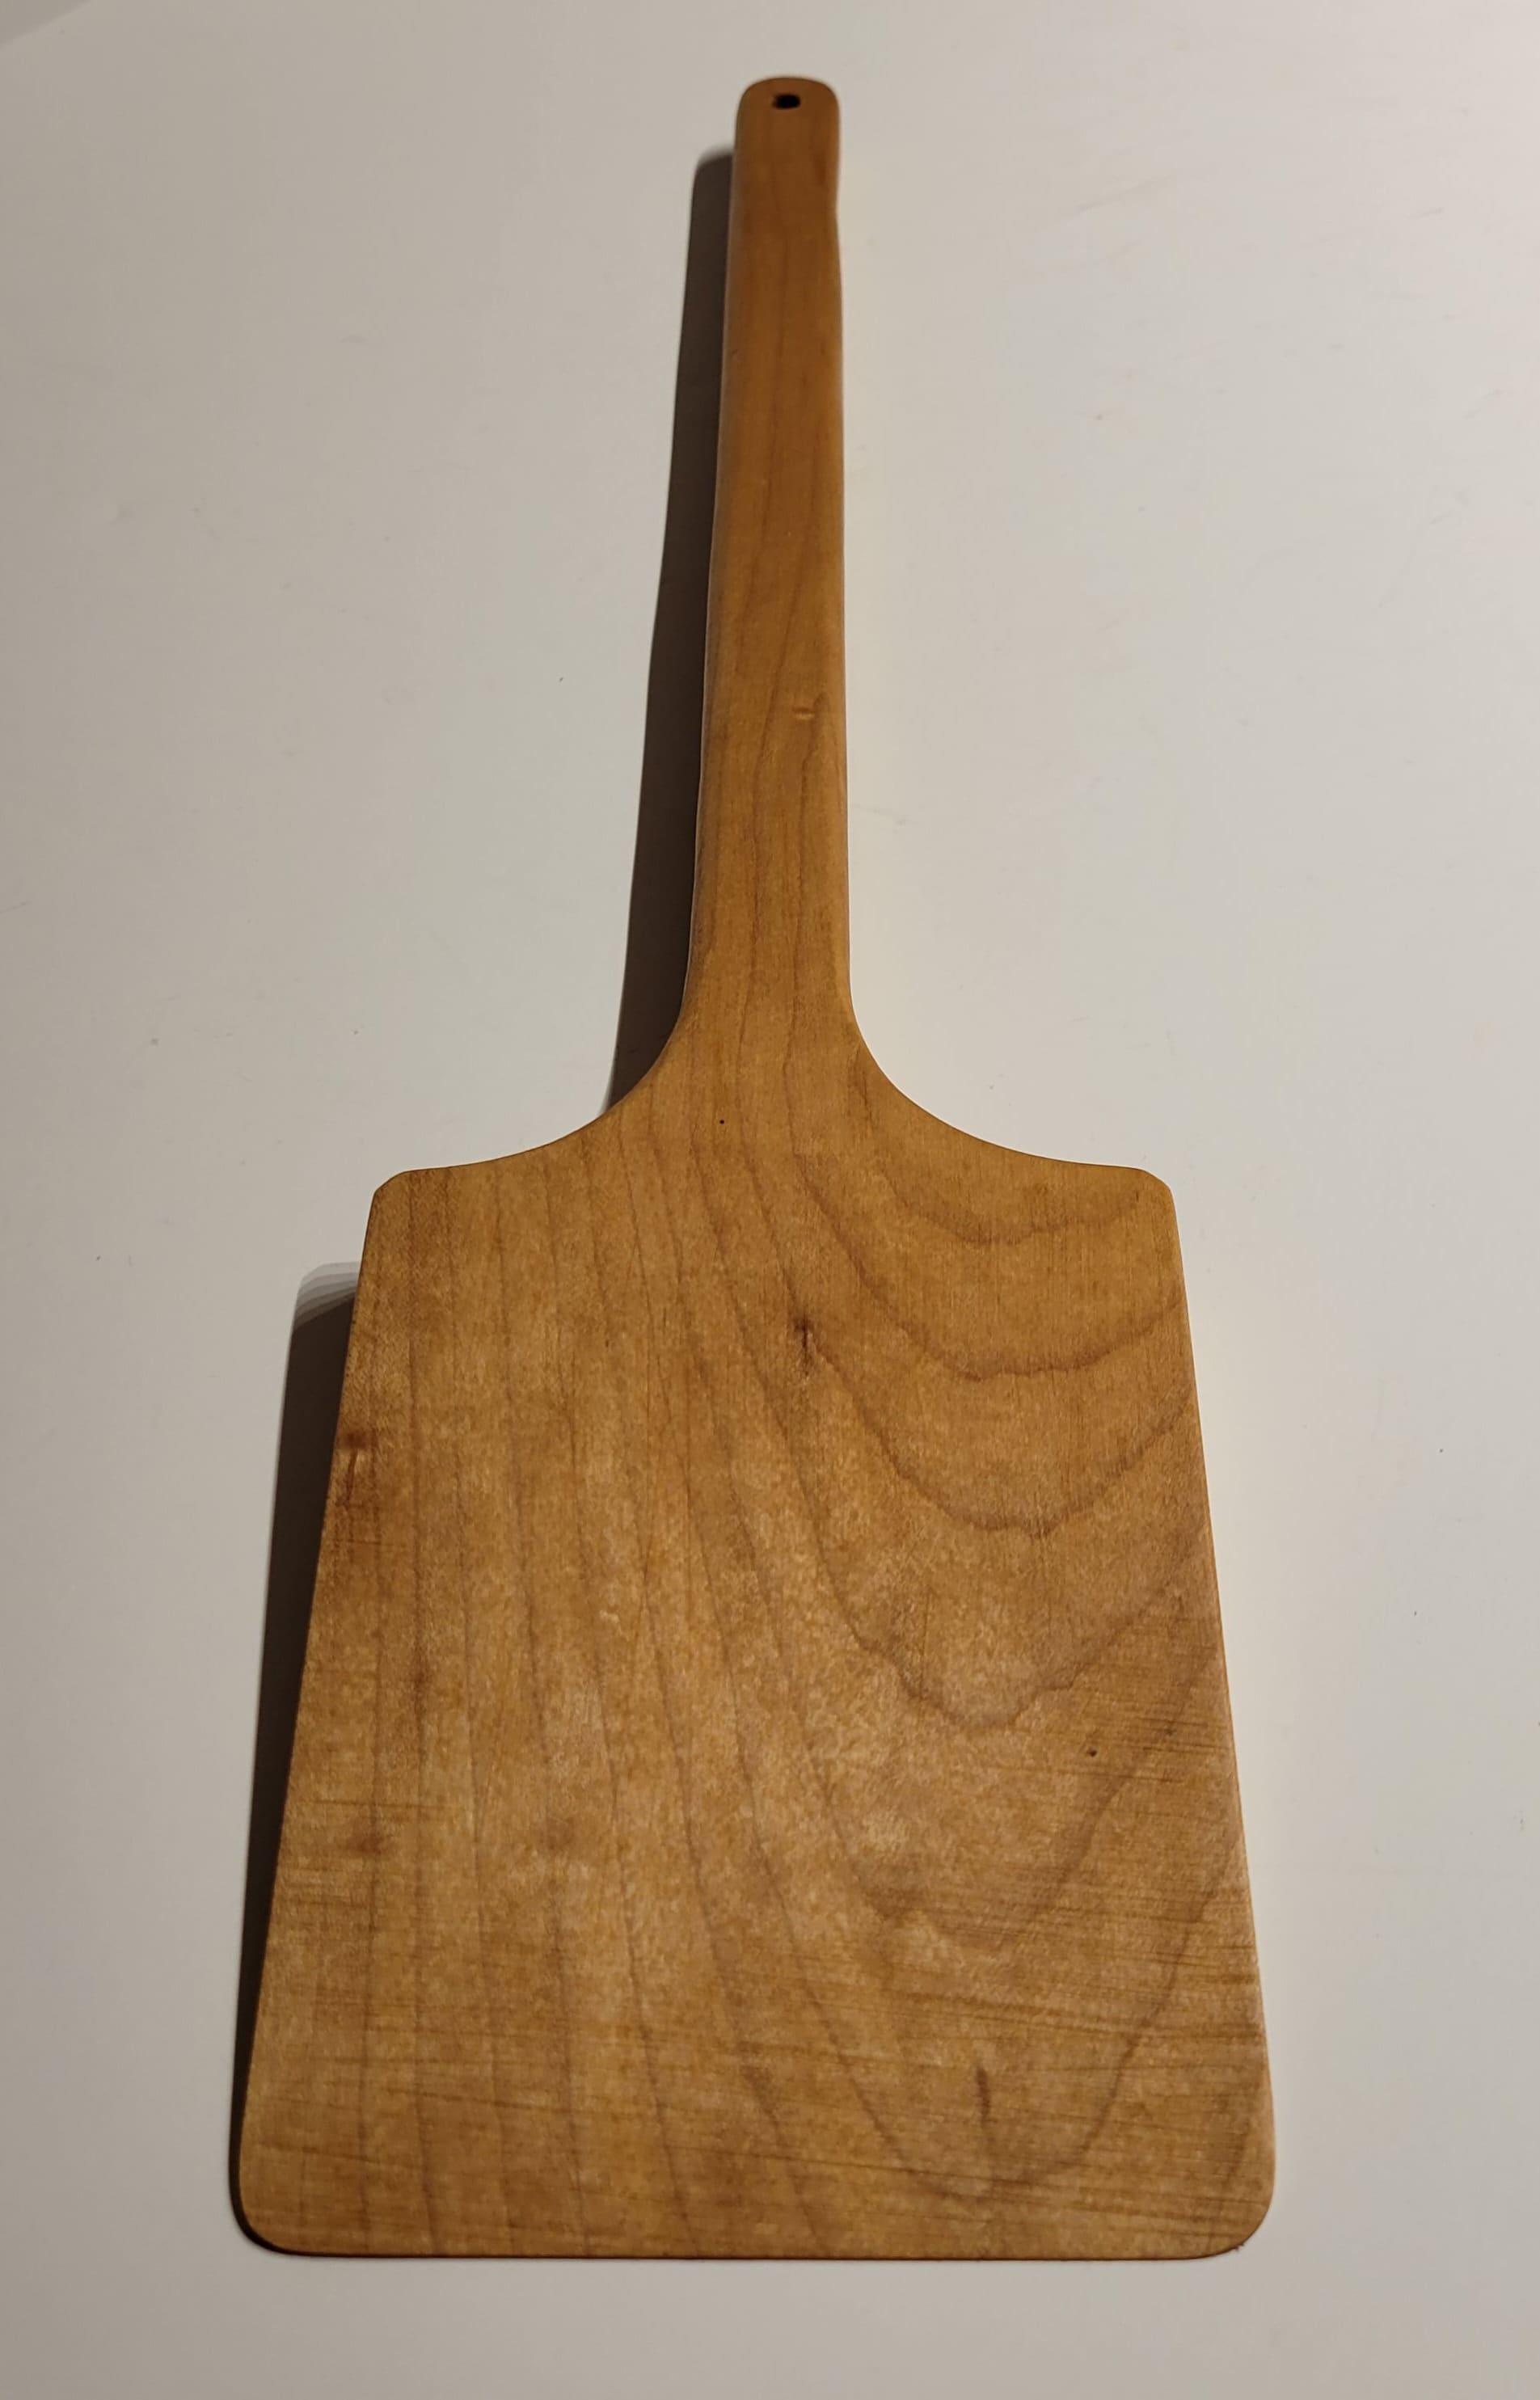 Chinese Spatula with Long Wooden Handle- 19.5 Inches (49.5 cm)